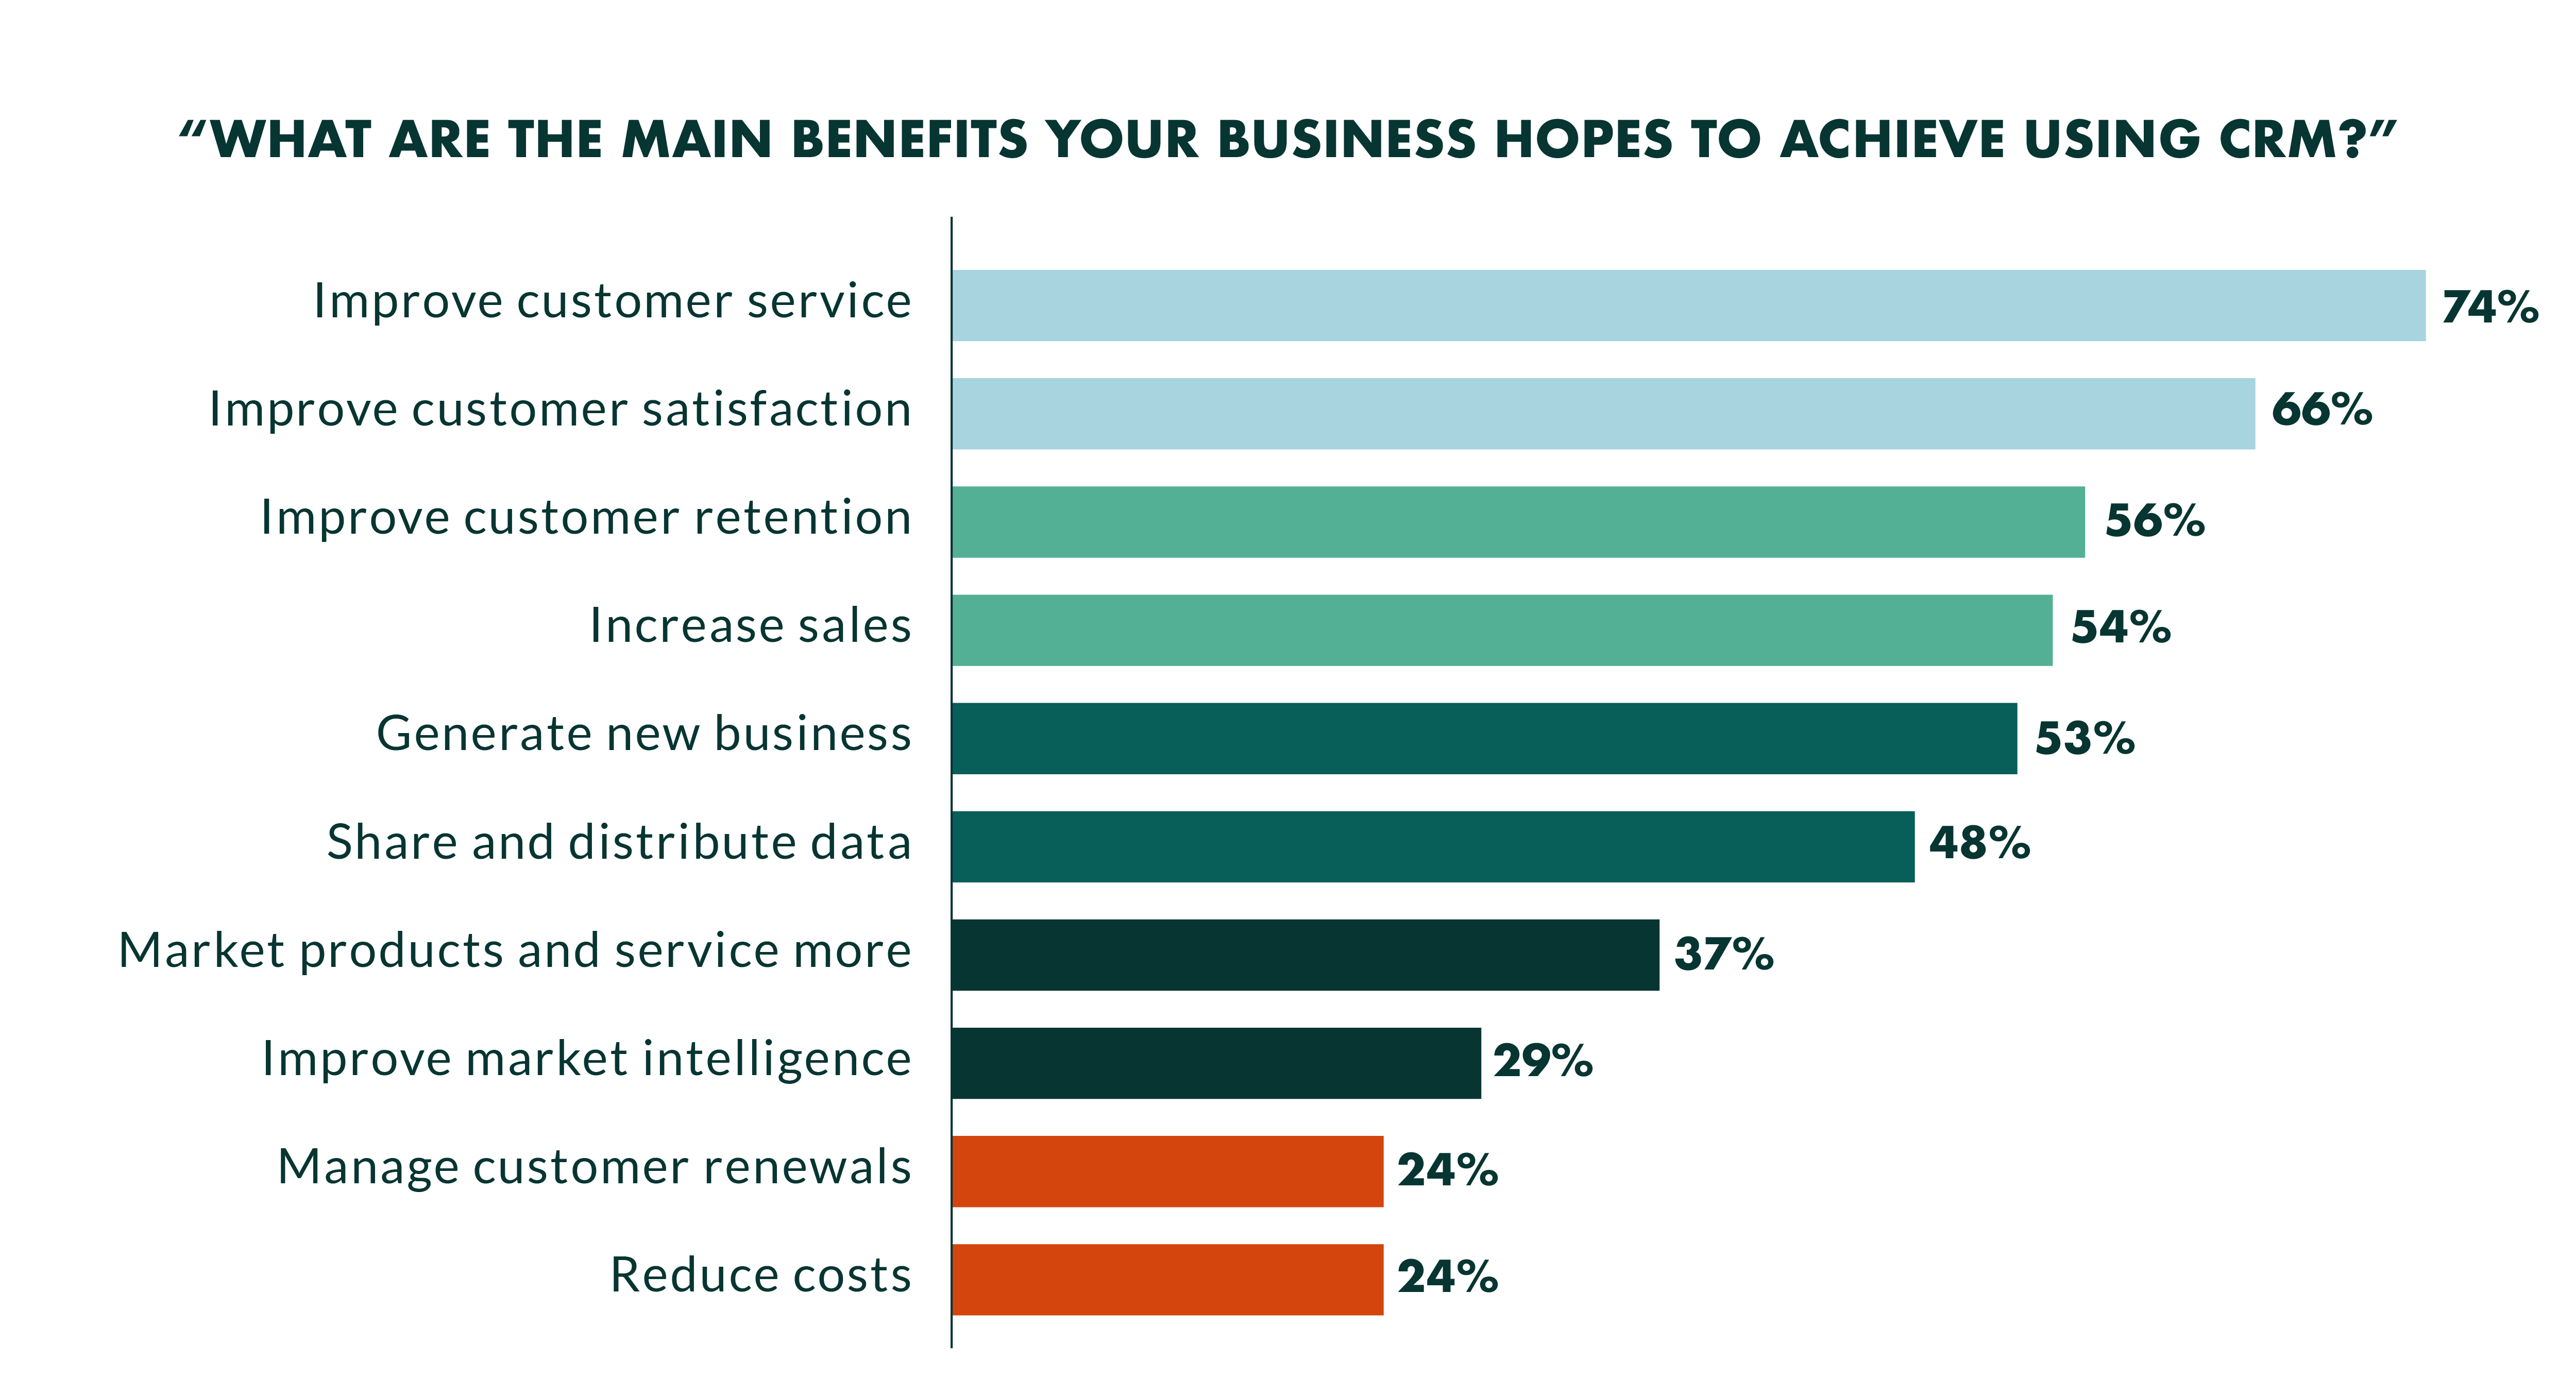 Main benefits associated with CRM